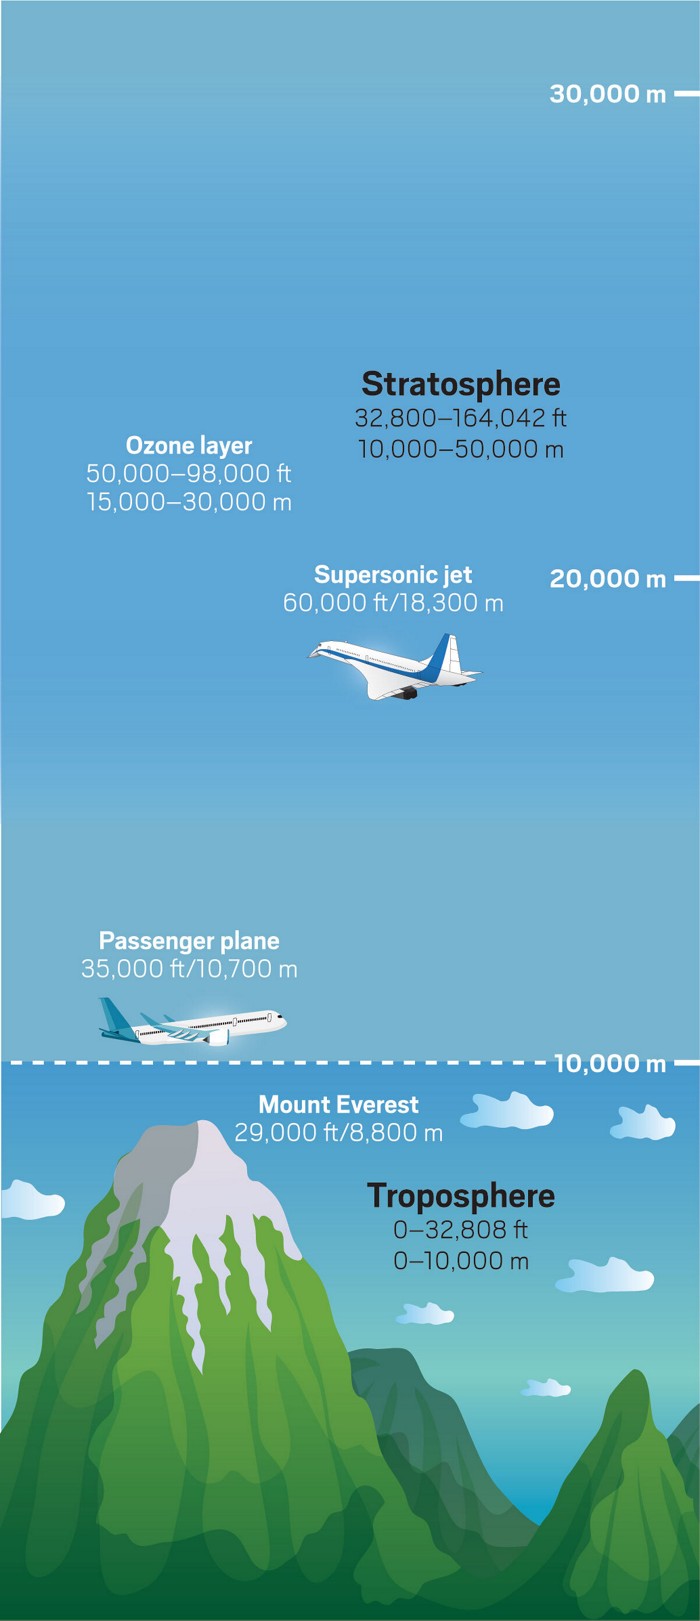 Approximate altitudes of subsonic versus supersonic planes, plus Mount Everest, the stratosphere, and other stuff.